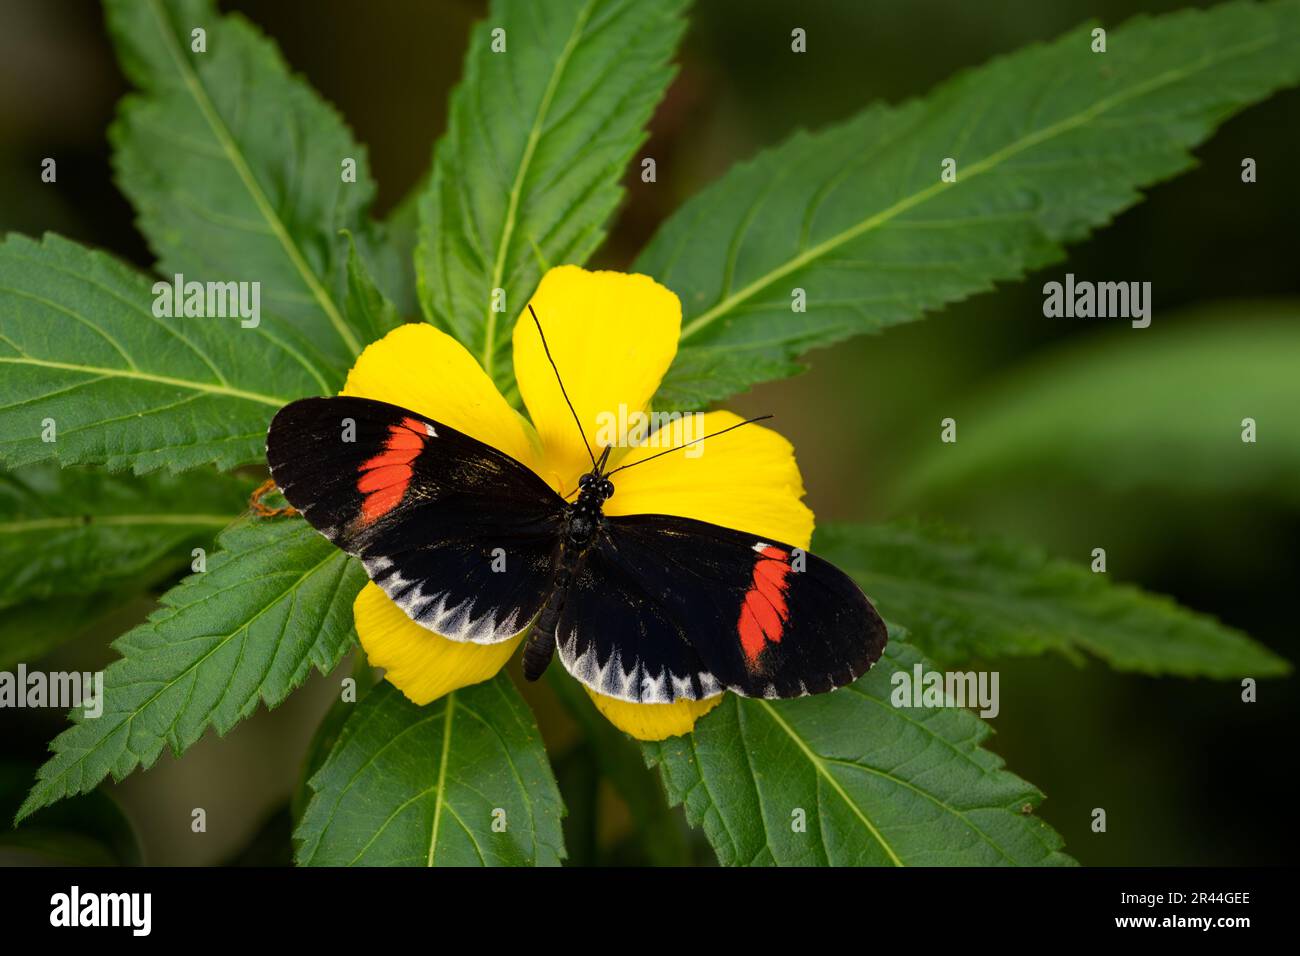 Common Postman - Heliconius melpomene, beautiful colored brushfoot butterfly from Central American meadows and forests, Mexico. Stock Photo